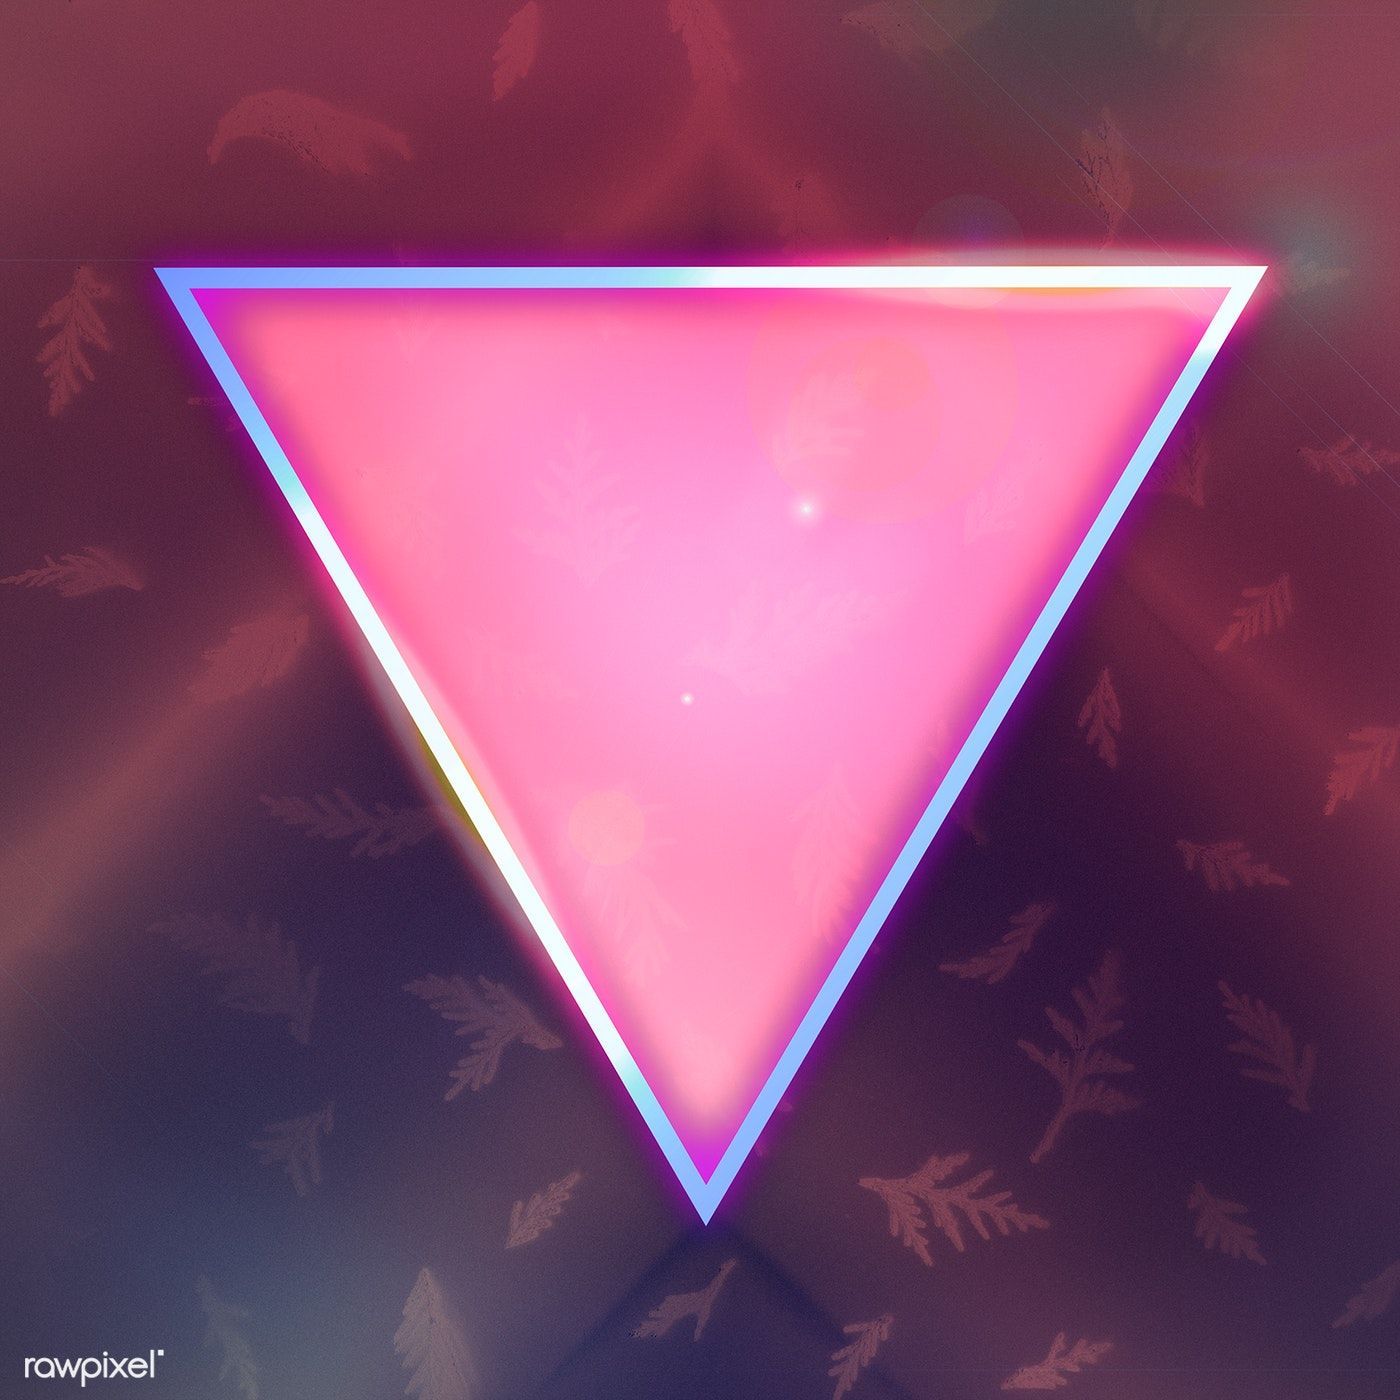 Download premium psd of Neon glowing triangle frame design 1212837